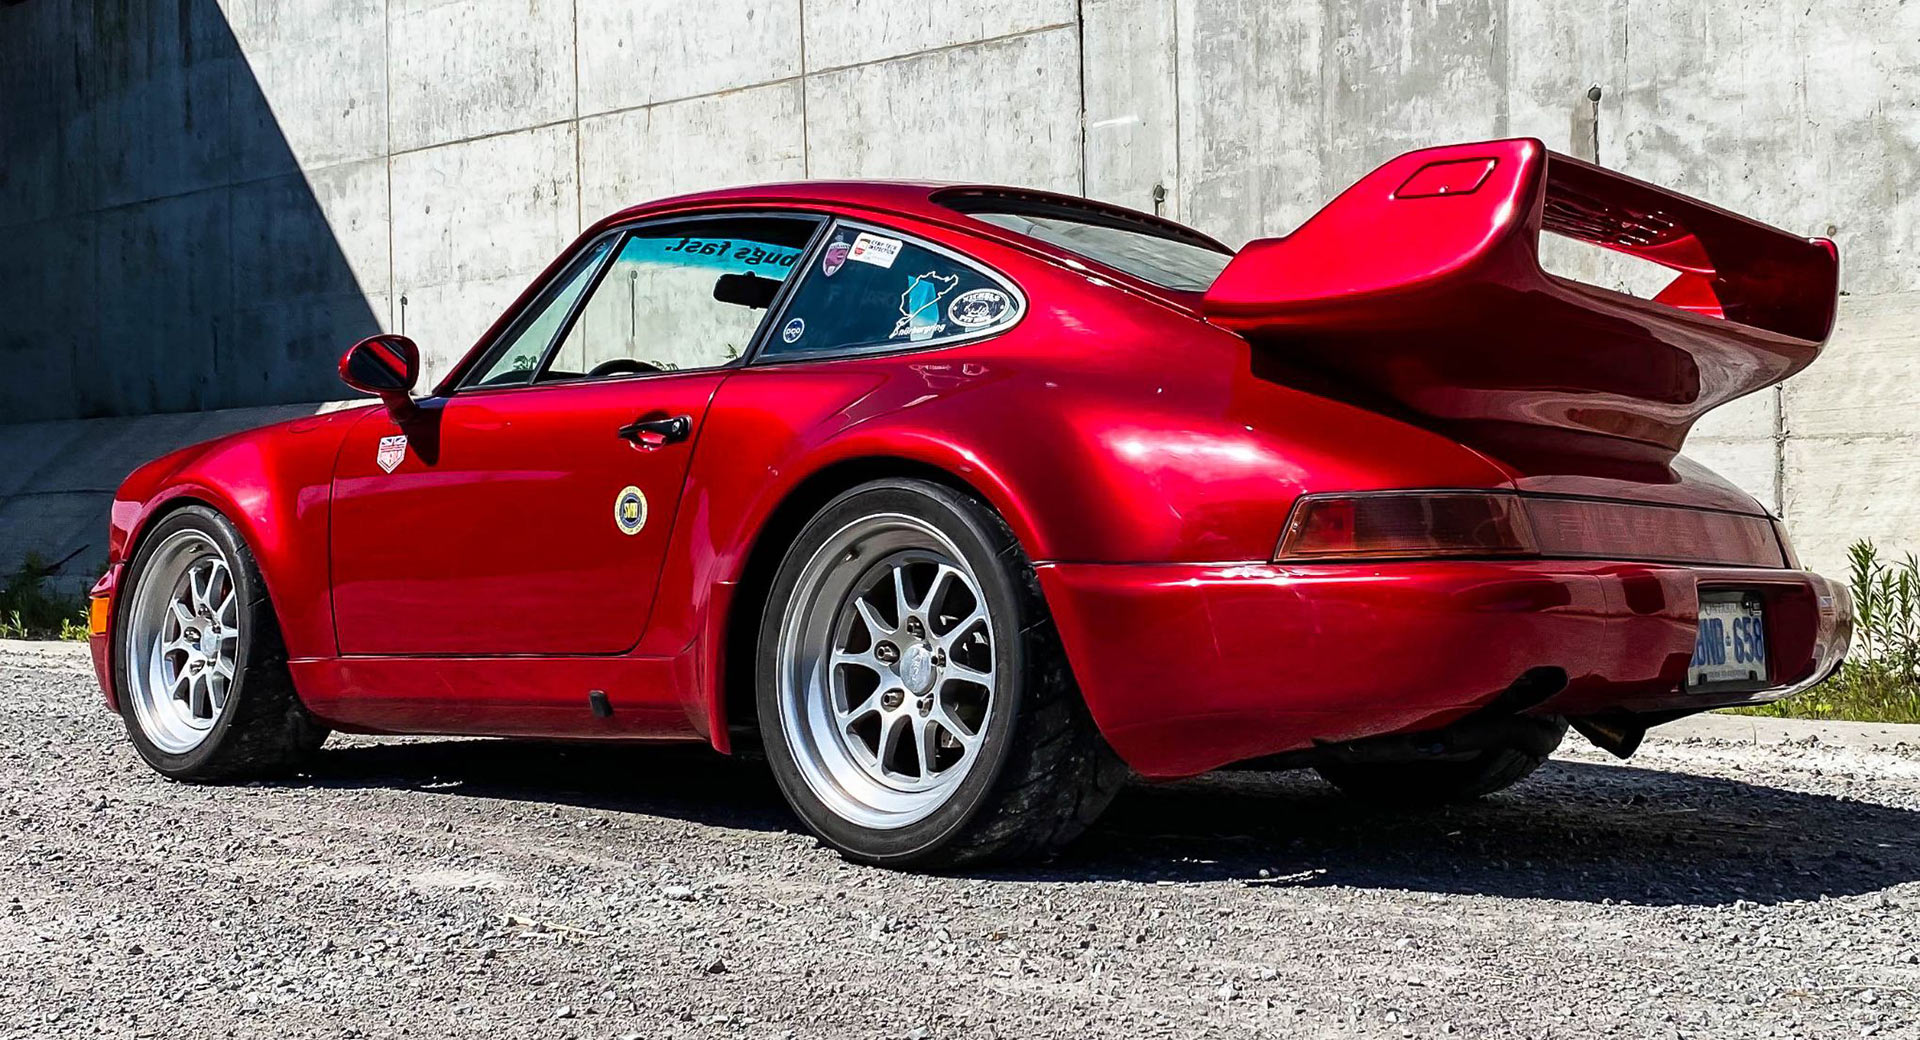 1975 Porsche 911 'Outlaw' Looks Like An Awesome Track Toy | Carscoops